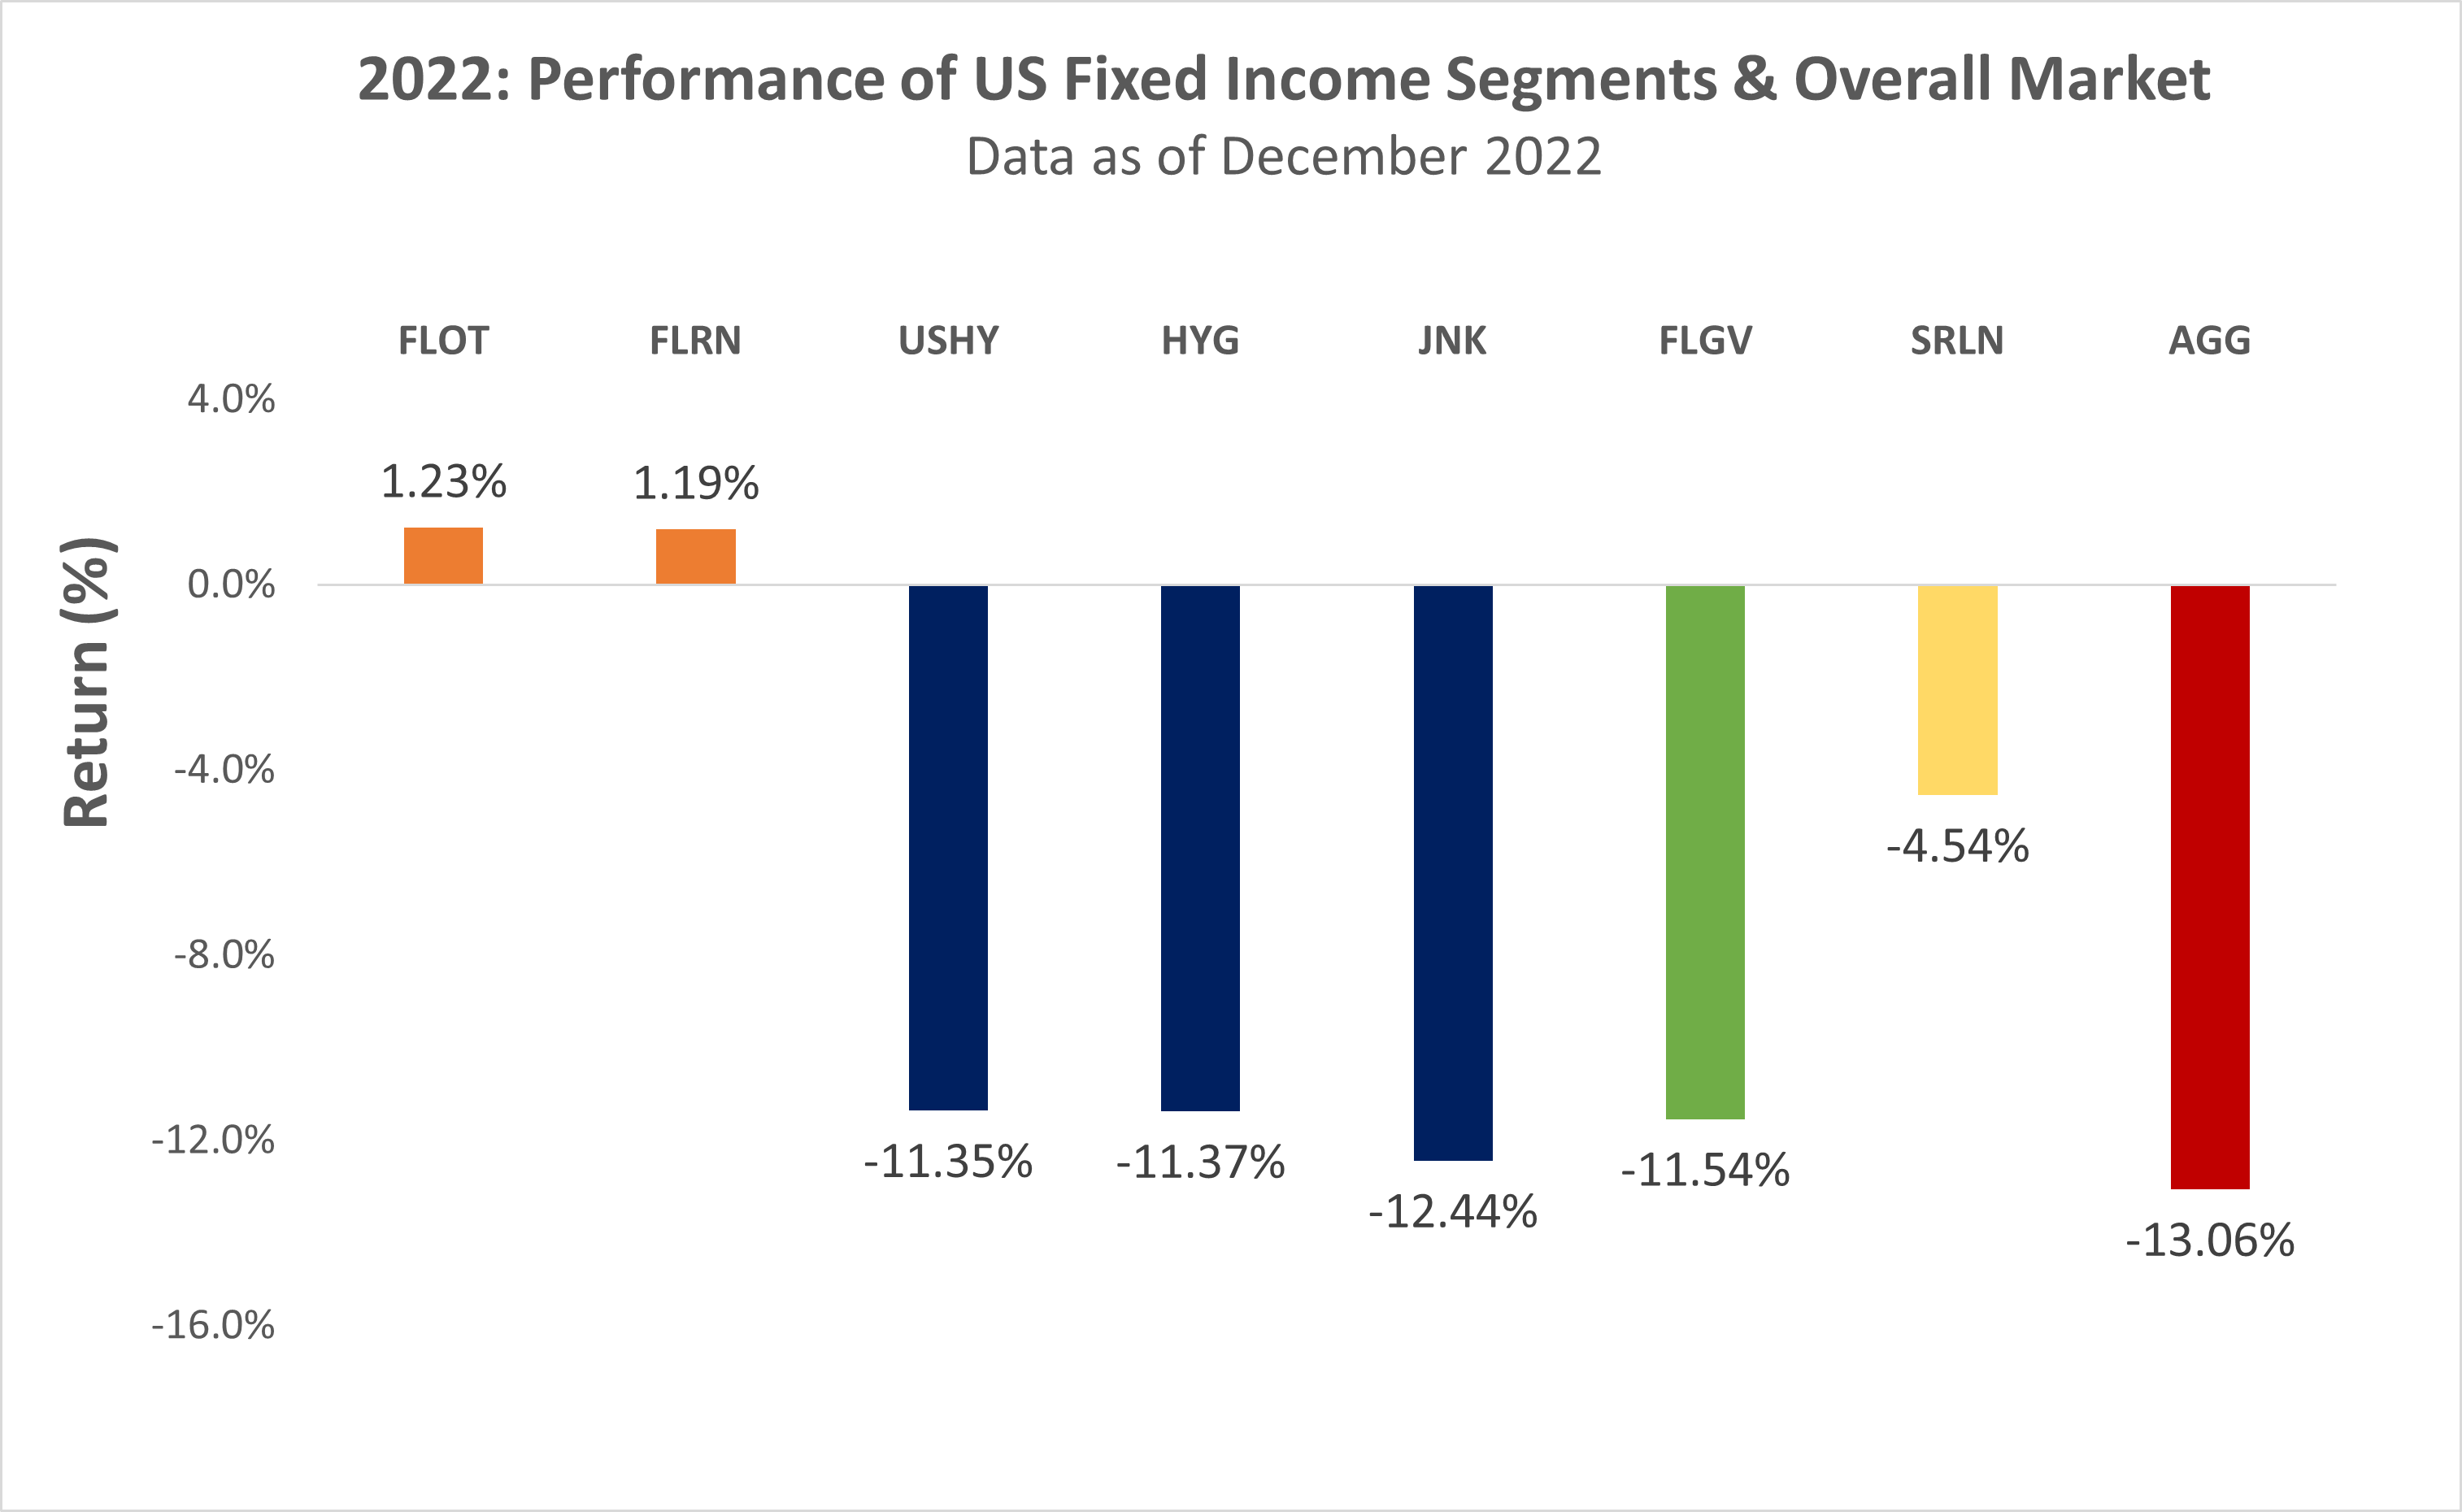 US Fixed Income Vs. Overall Market Performance